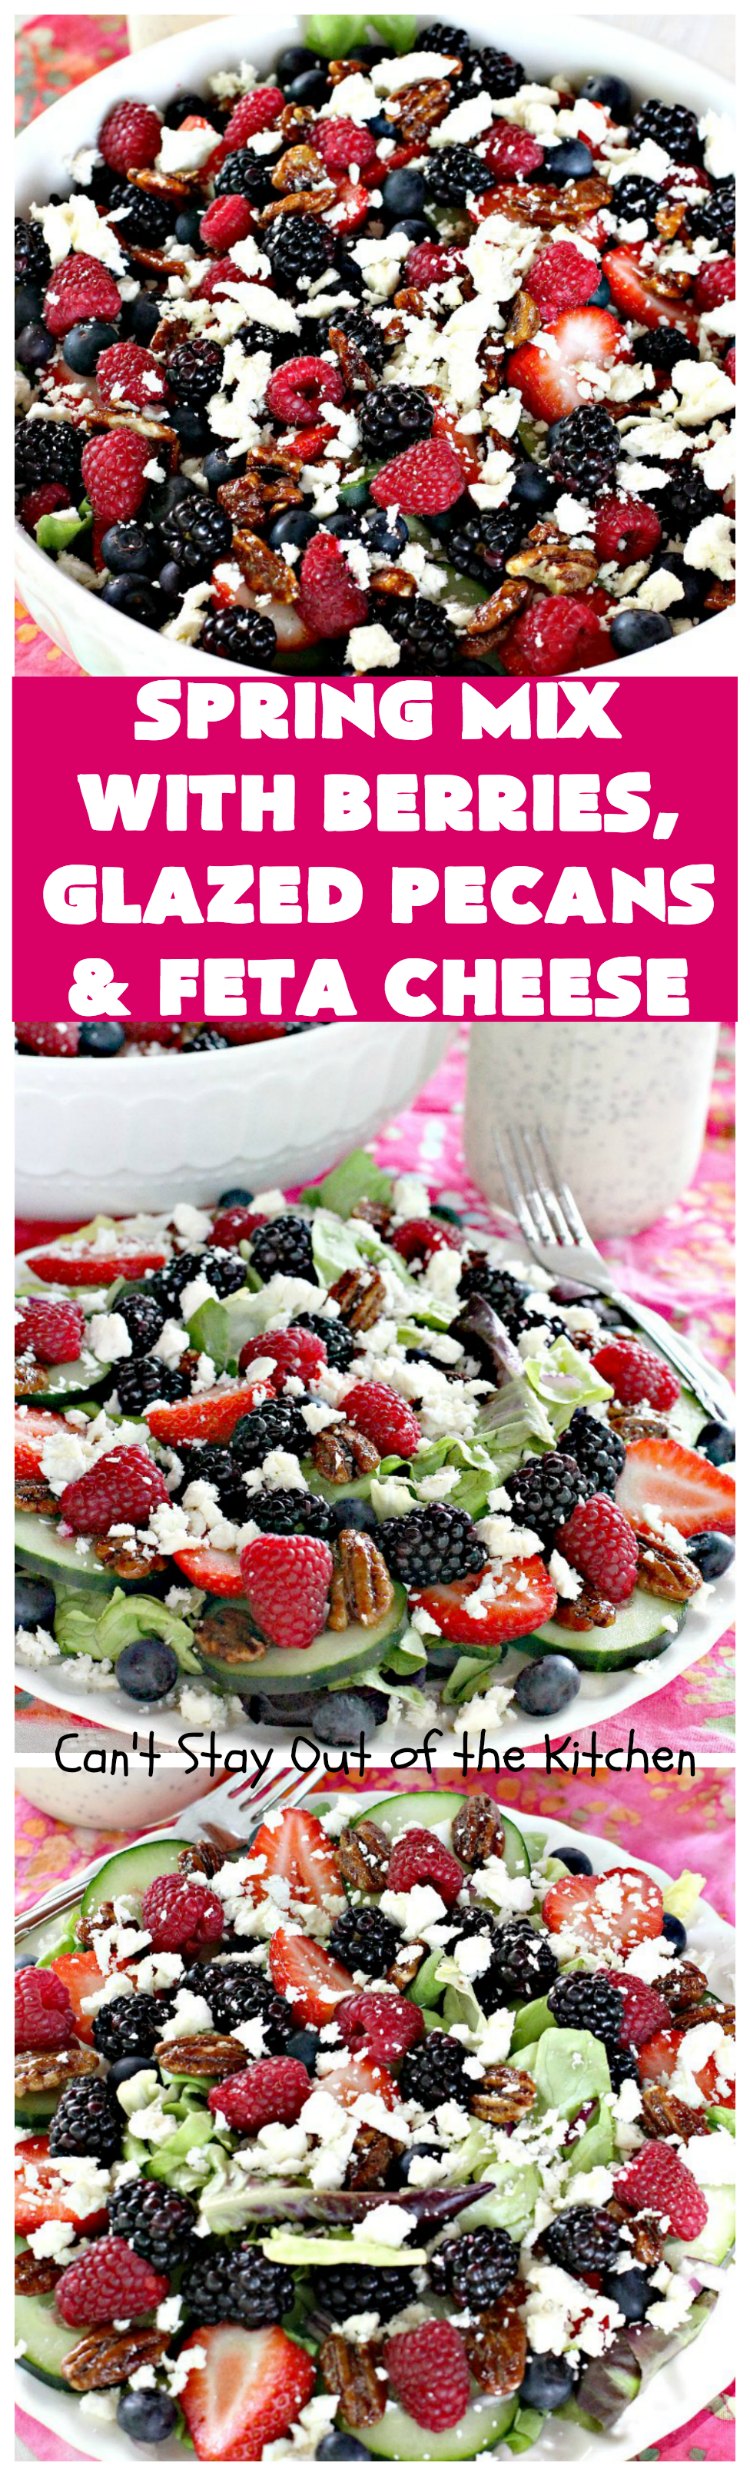 Spring Mix with Berries, Glazed Pecans and Feta Cheese | Can't Stay Out of the Kitchen